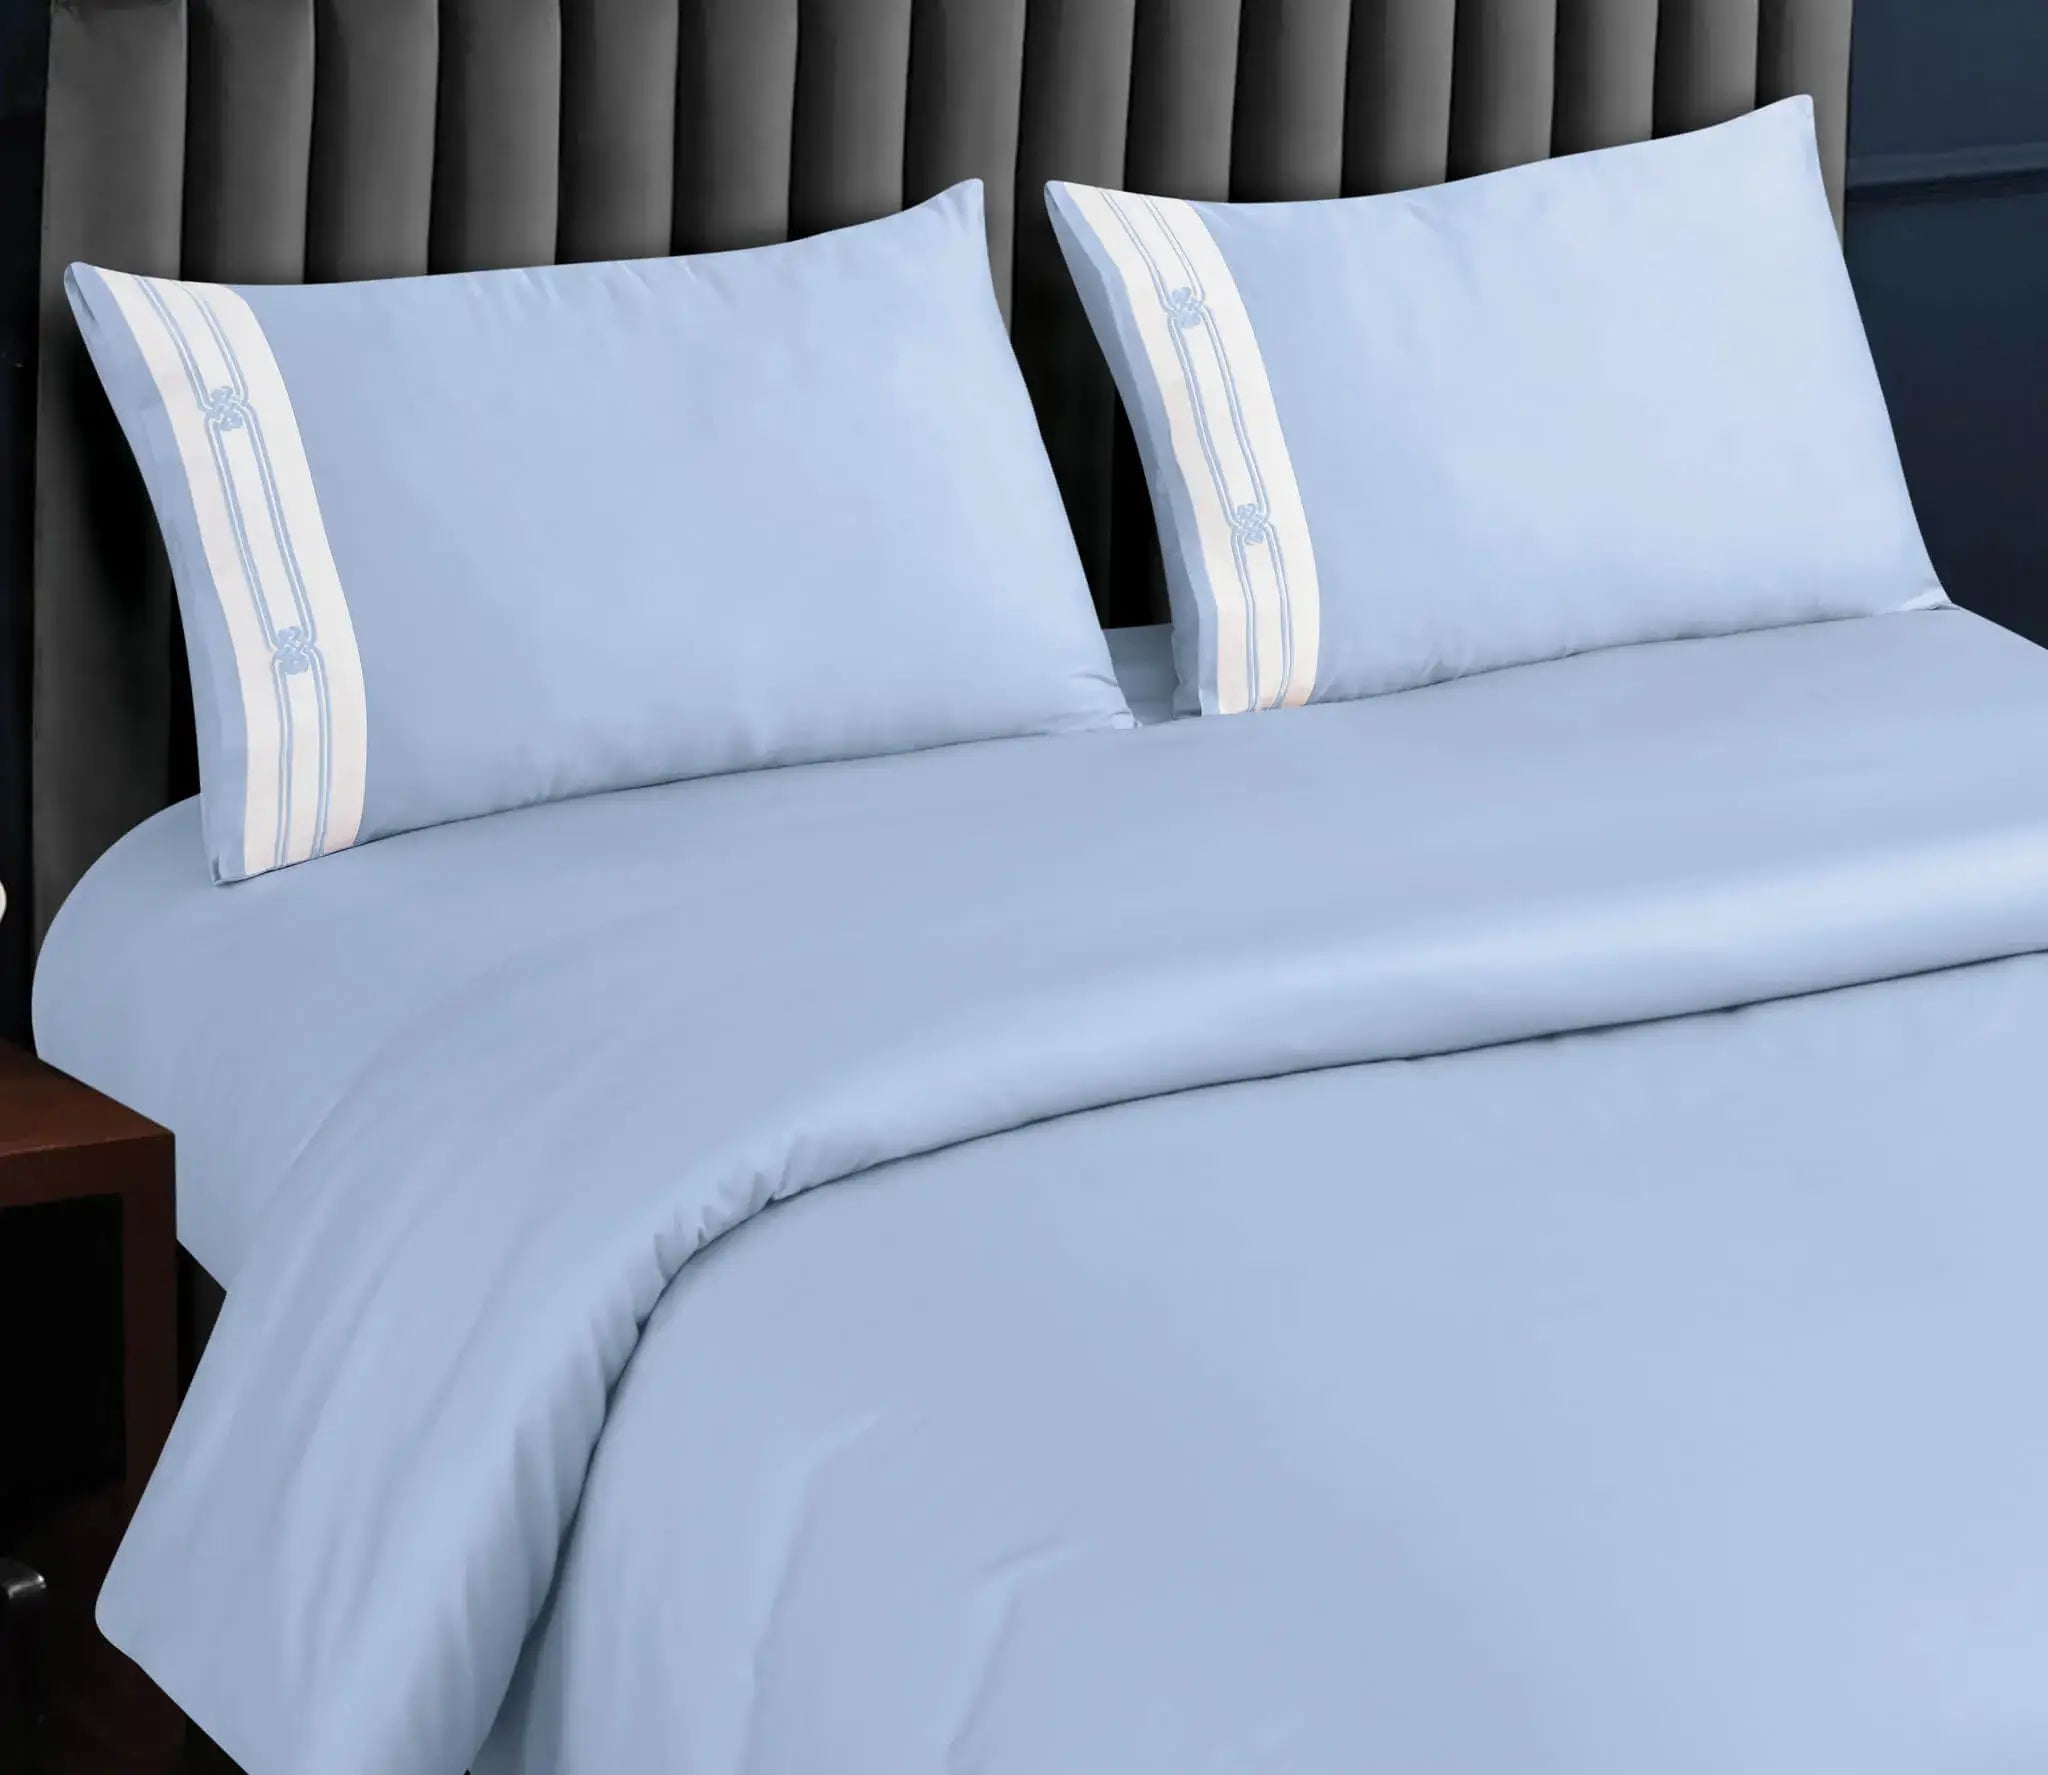 sky-blue-king-size-bed-sheets-cotton